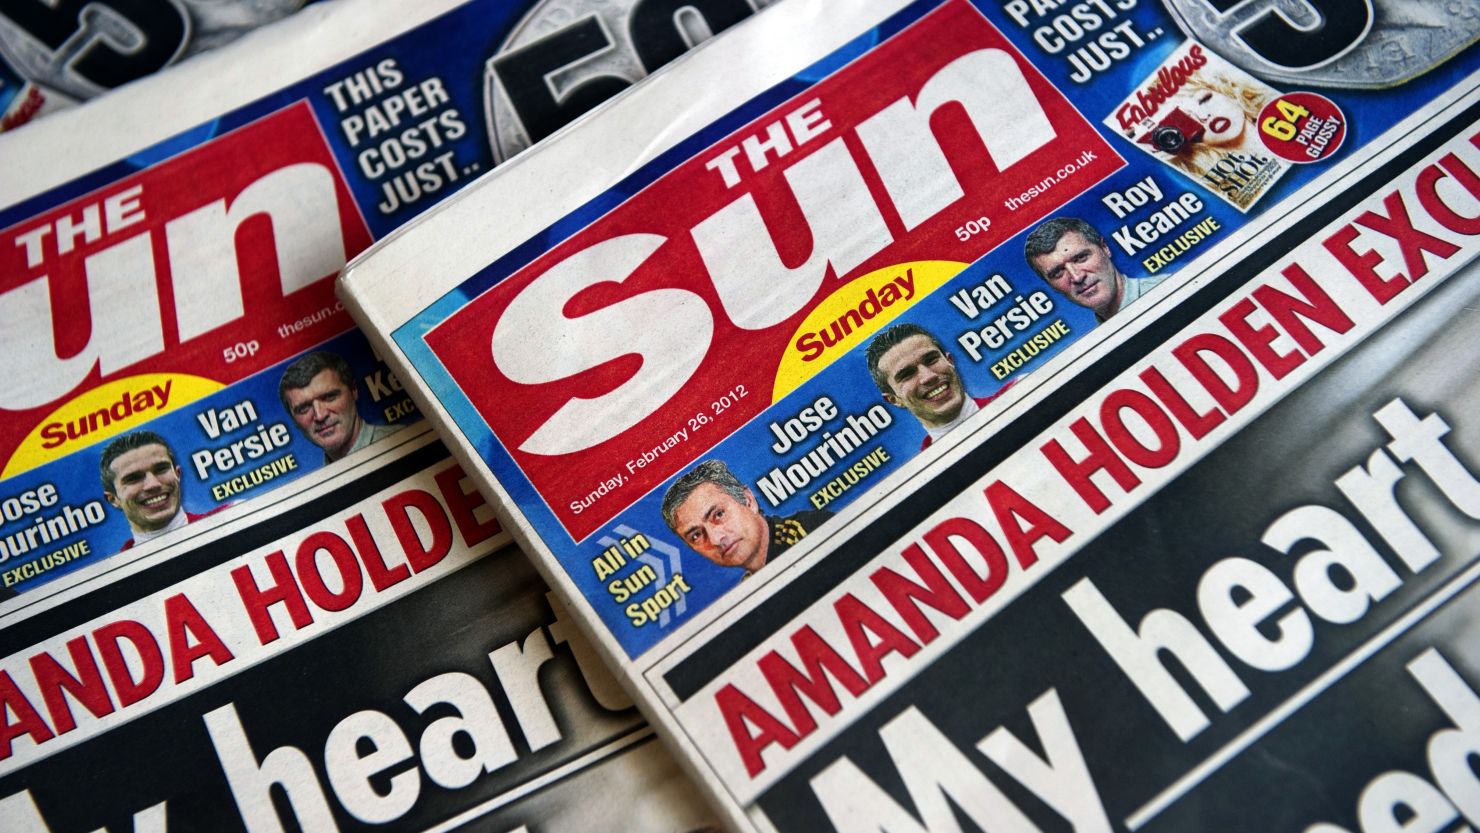 The new British Newspaper 'The Sun on Sunday' on February 26, 2012 in London.